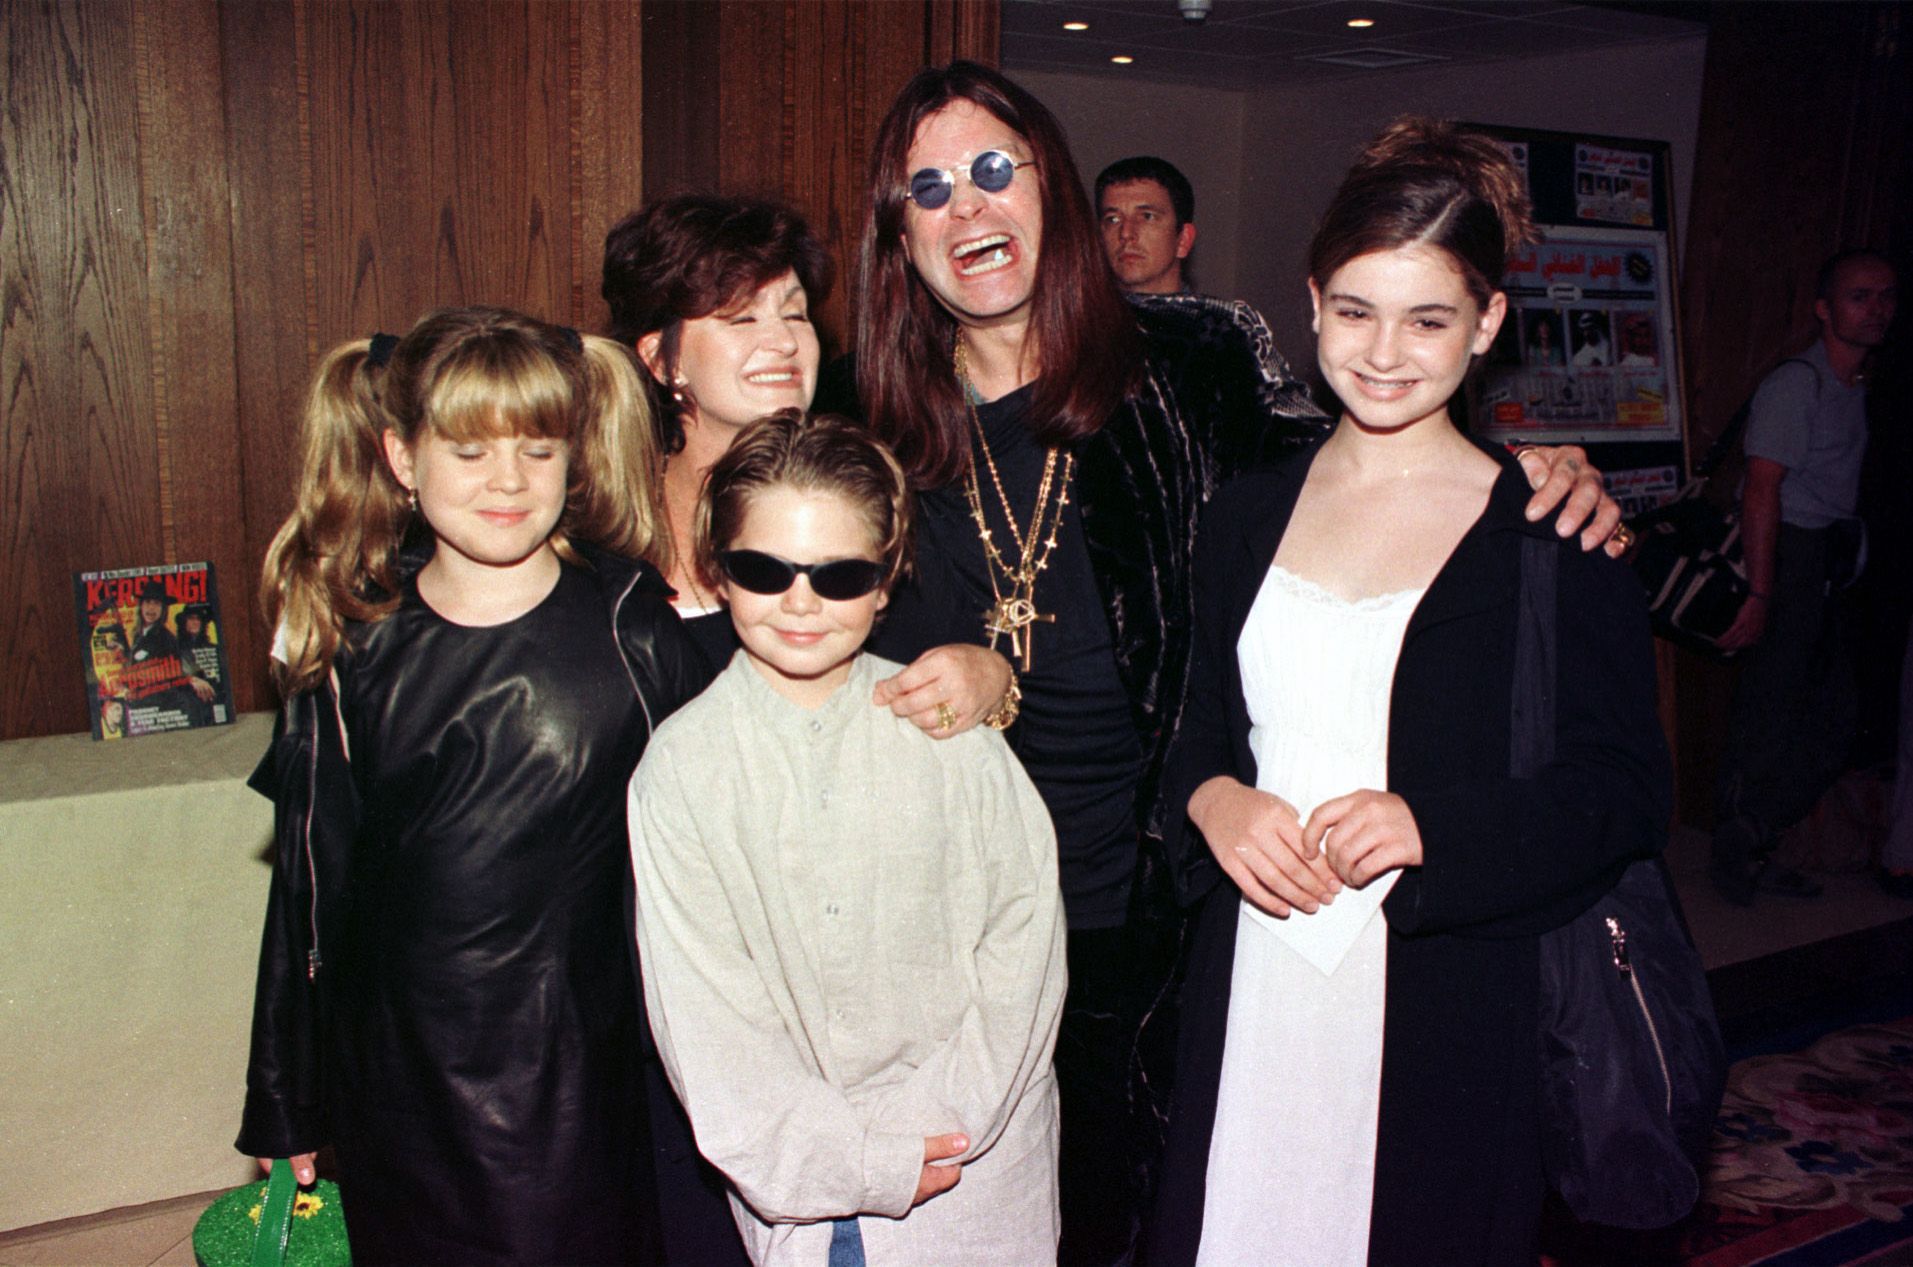 Ozzy Osbourne, wife Sharon and children Kelly, Jack and Aimee at the Kerrang Awards on August 21, 1997 (Photo: Getty Images